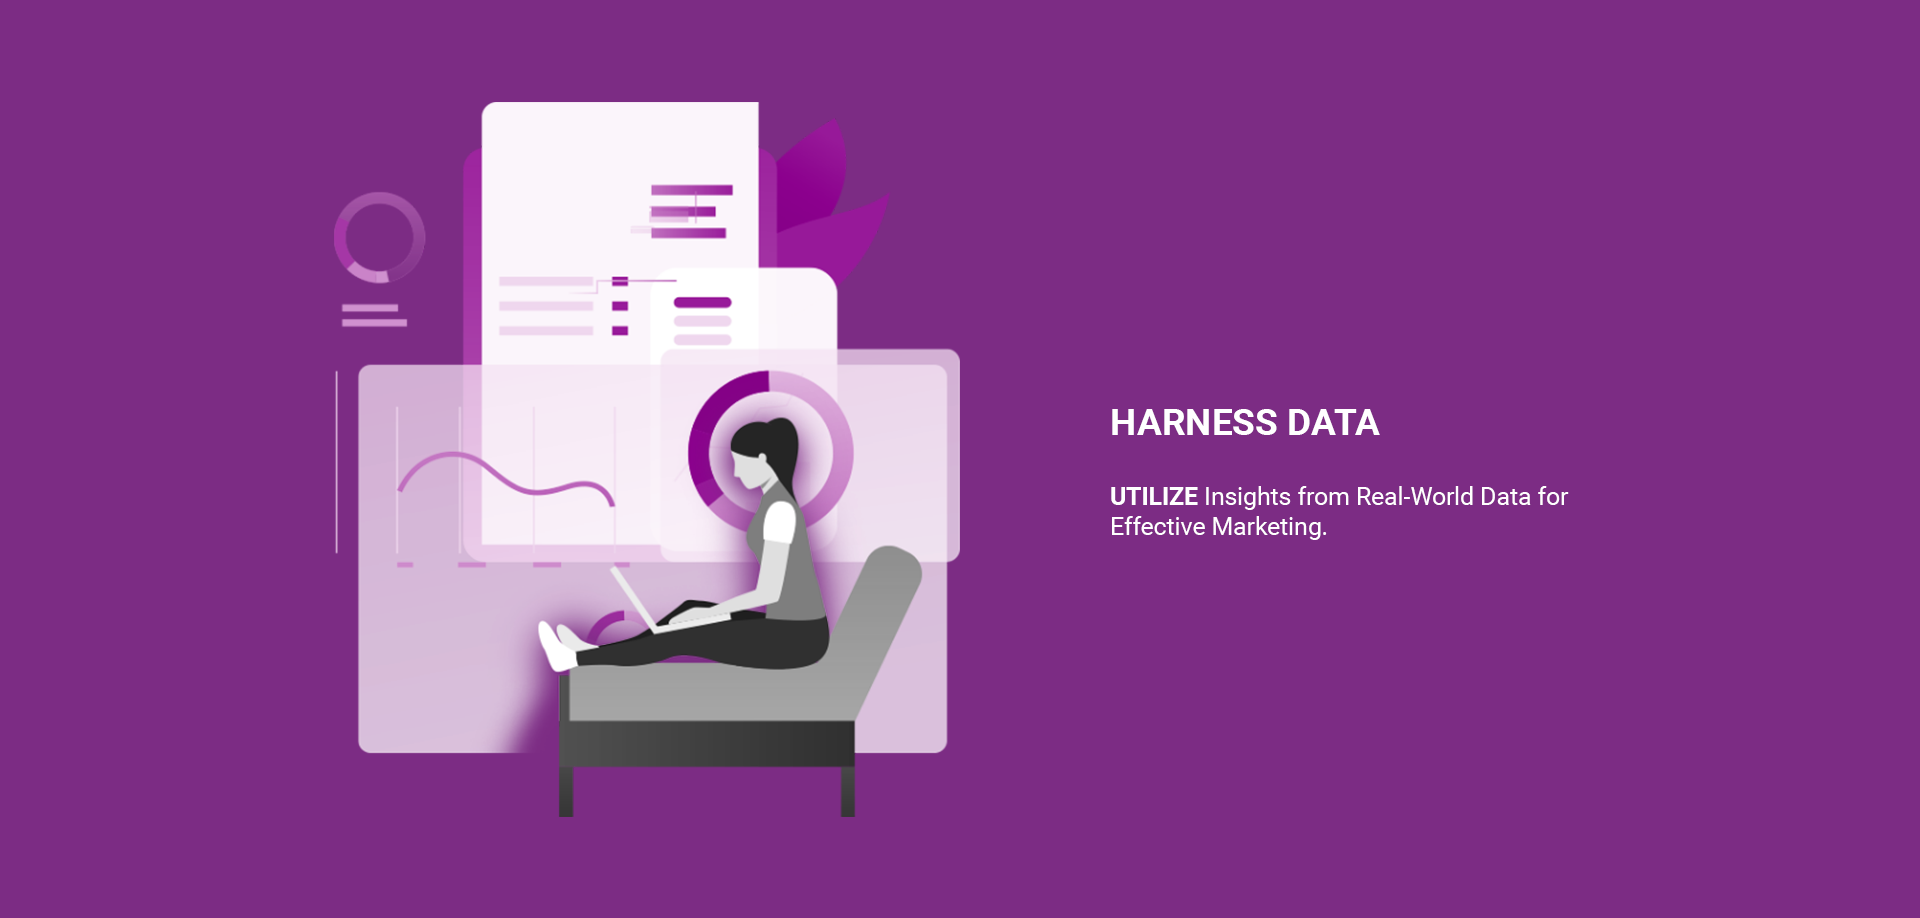 Illustration of an individual analyzing data on a digital platform, highlighting the text "Harness Data"